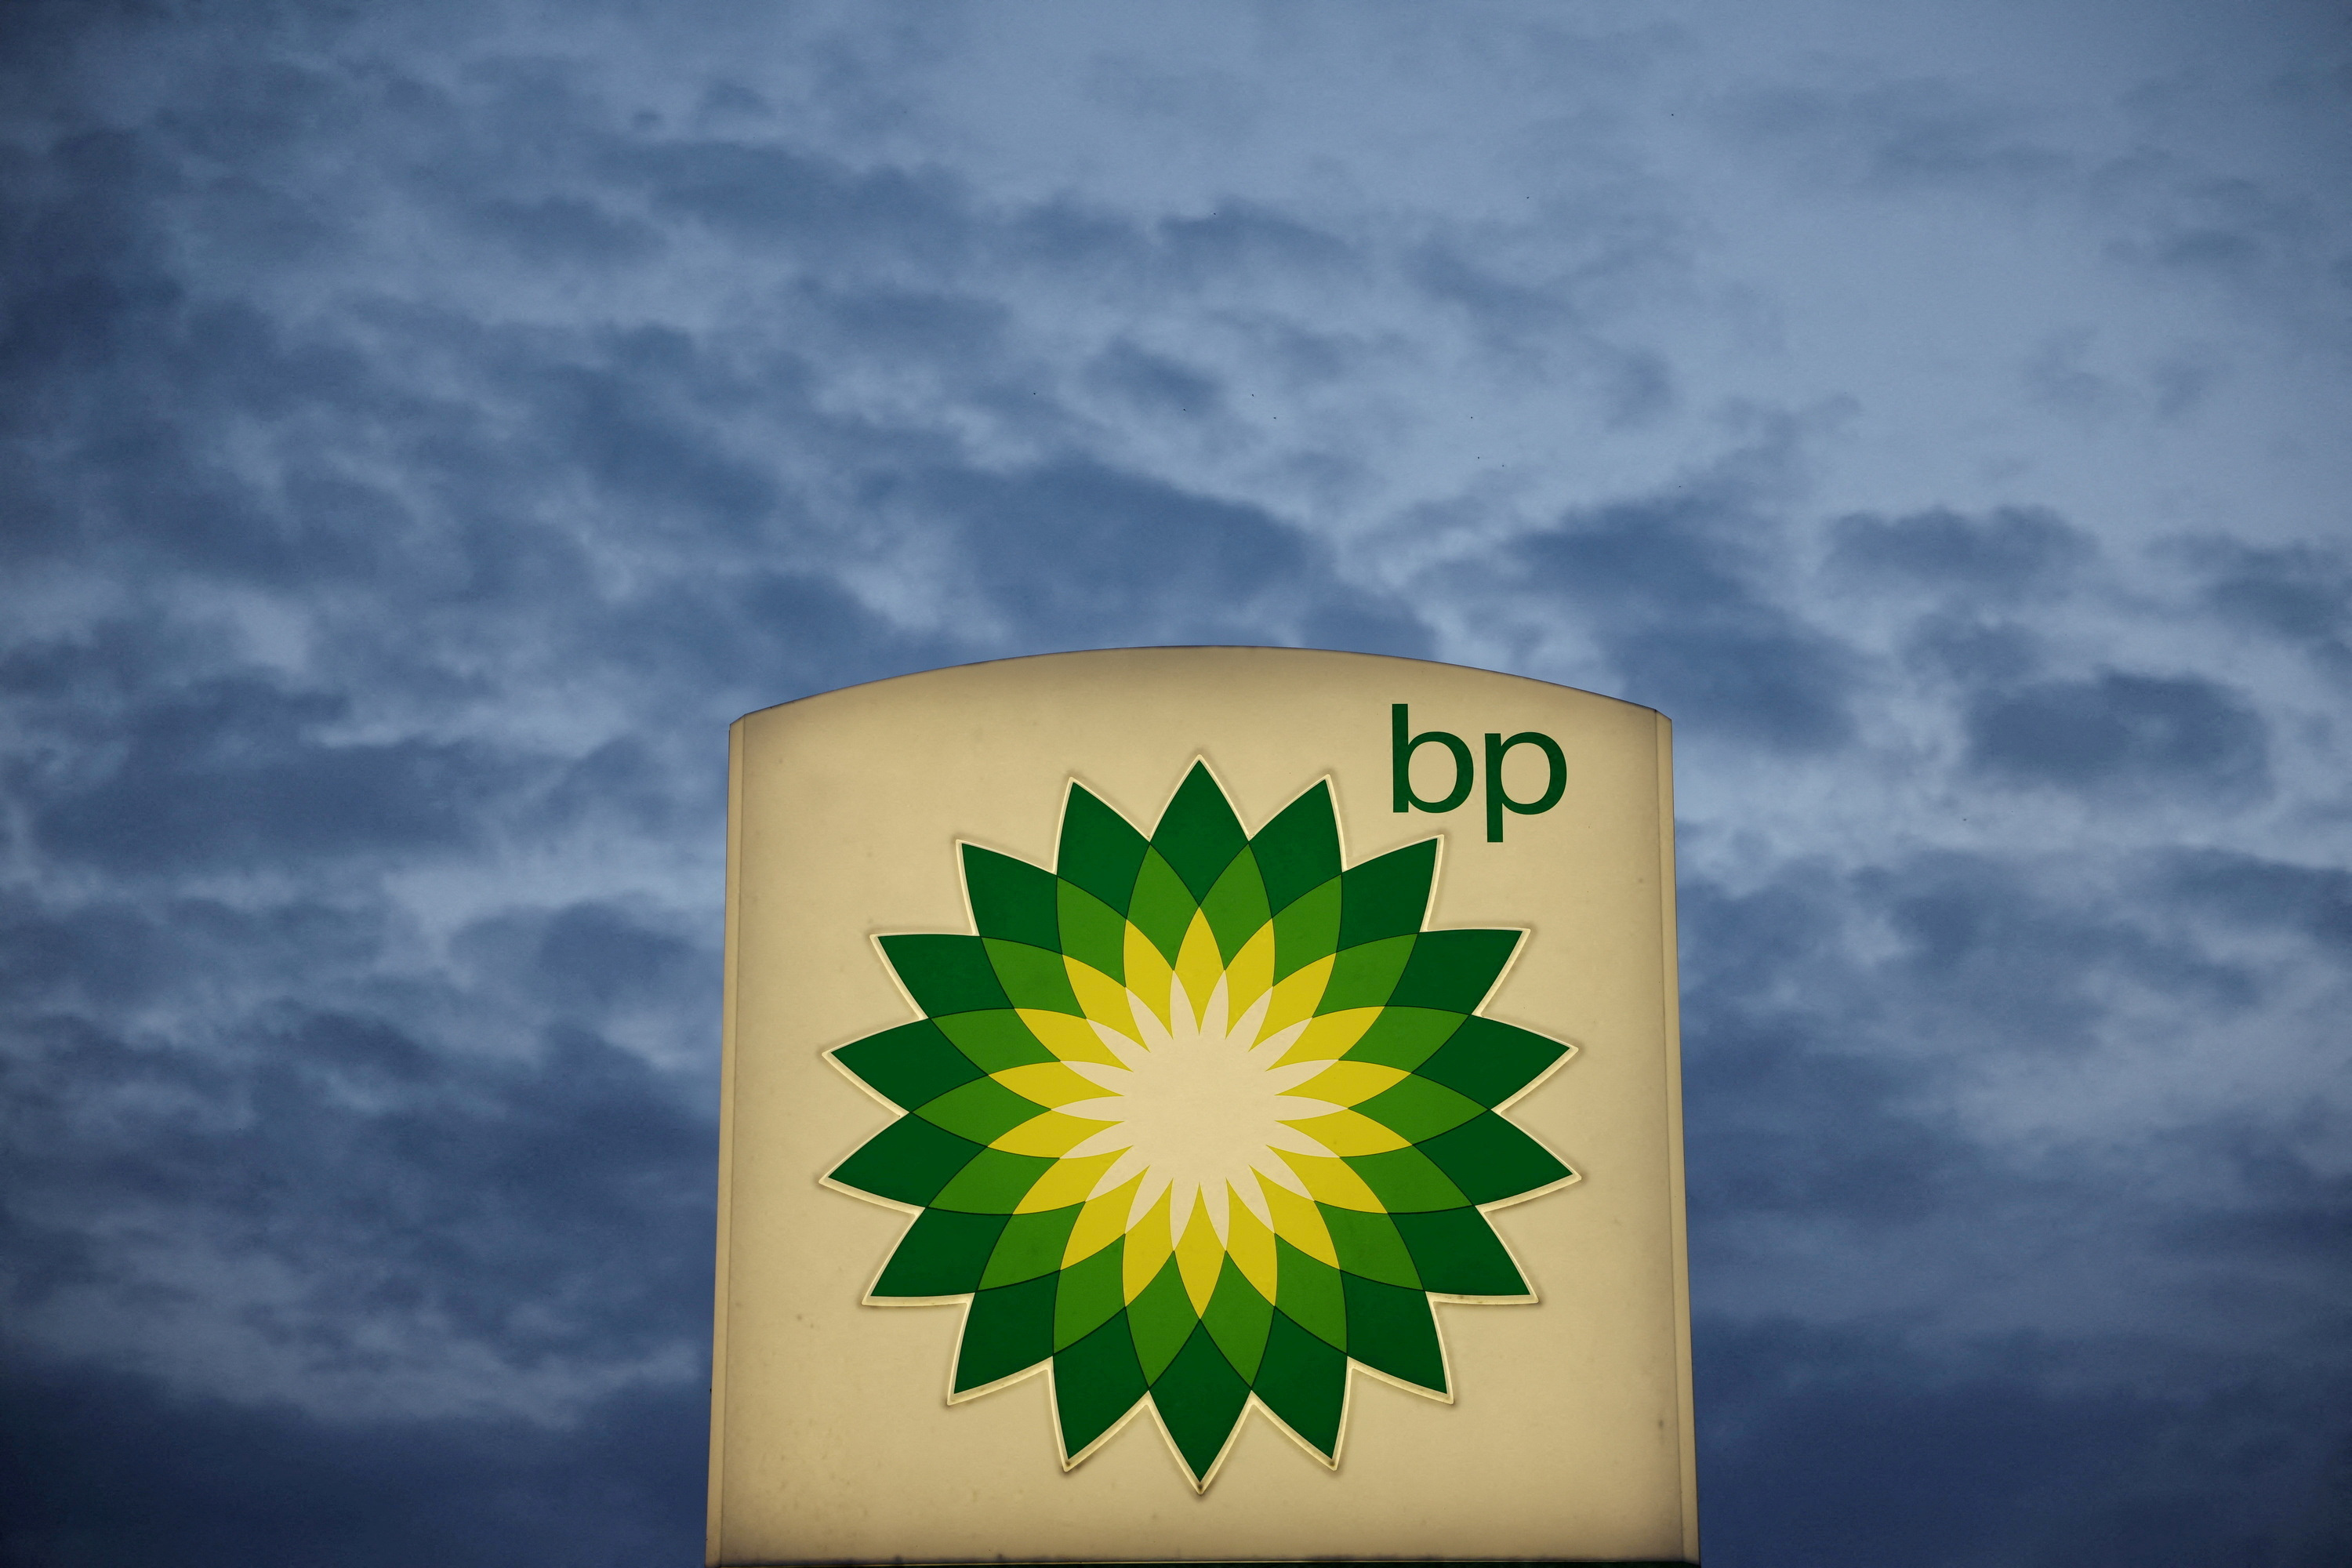 Logo of British Petrol BP is seen at a petrol station in Pienkow